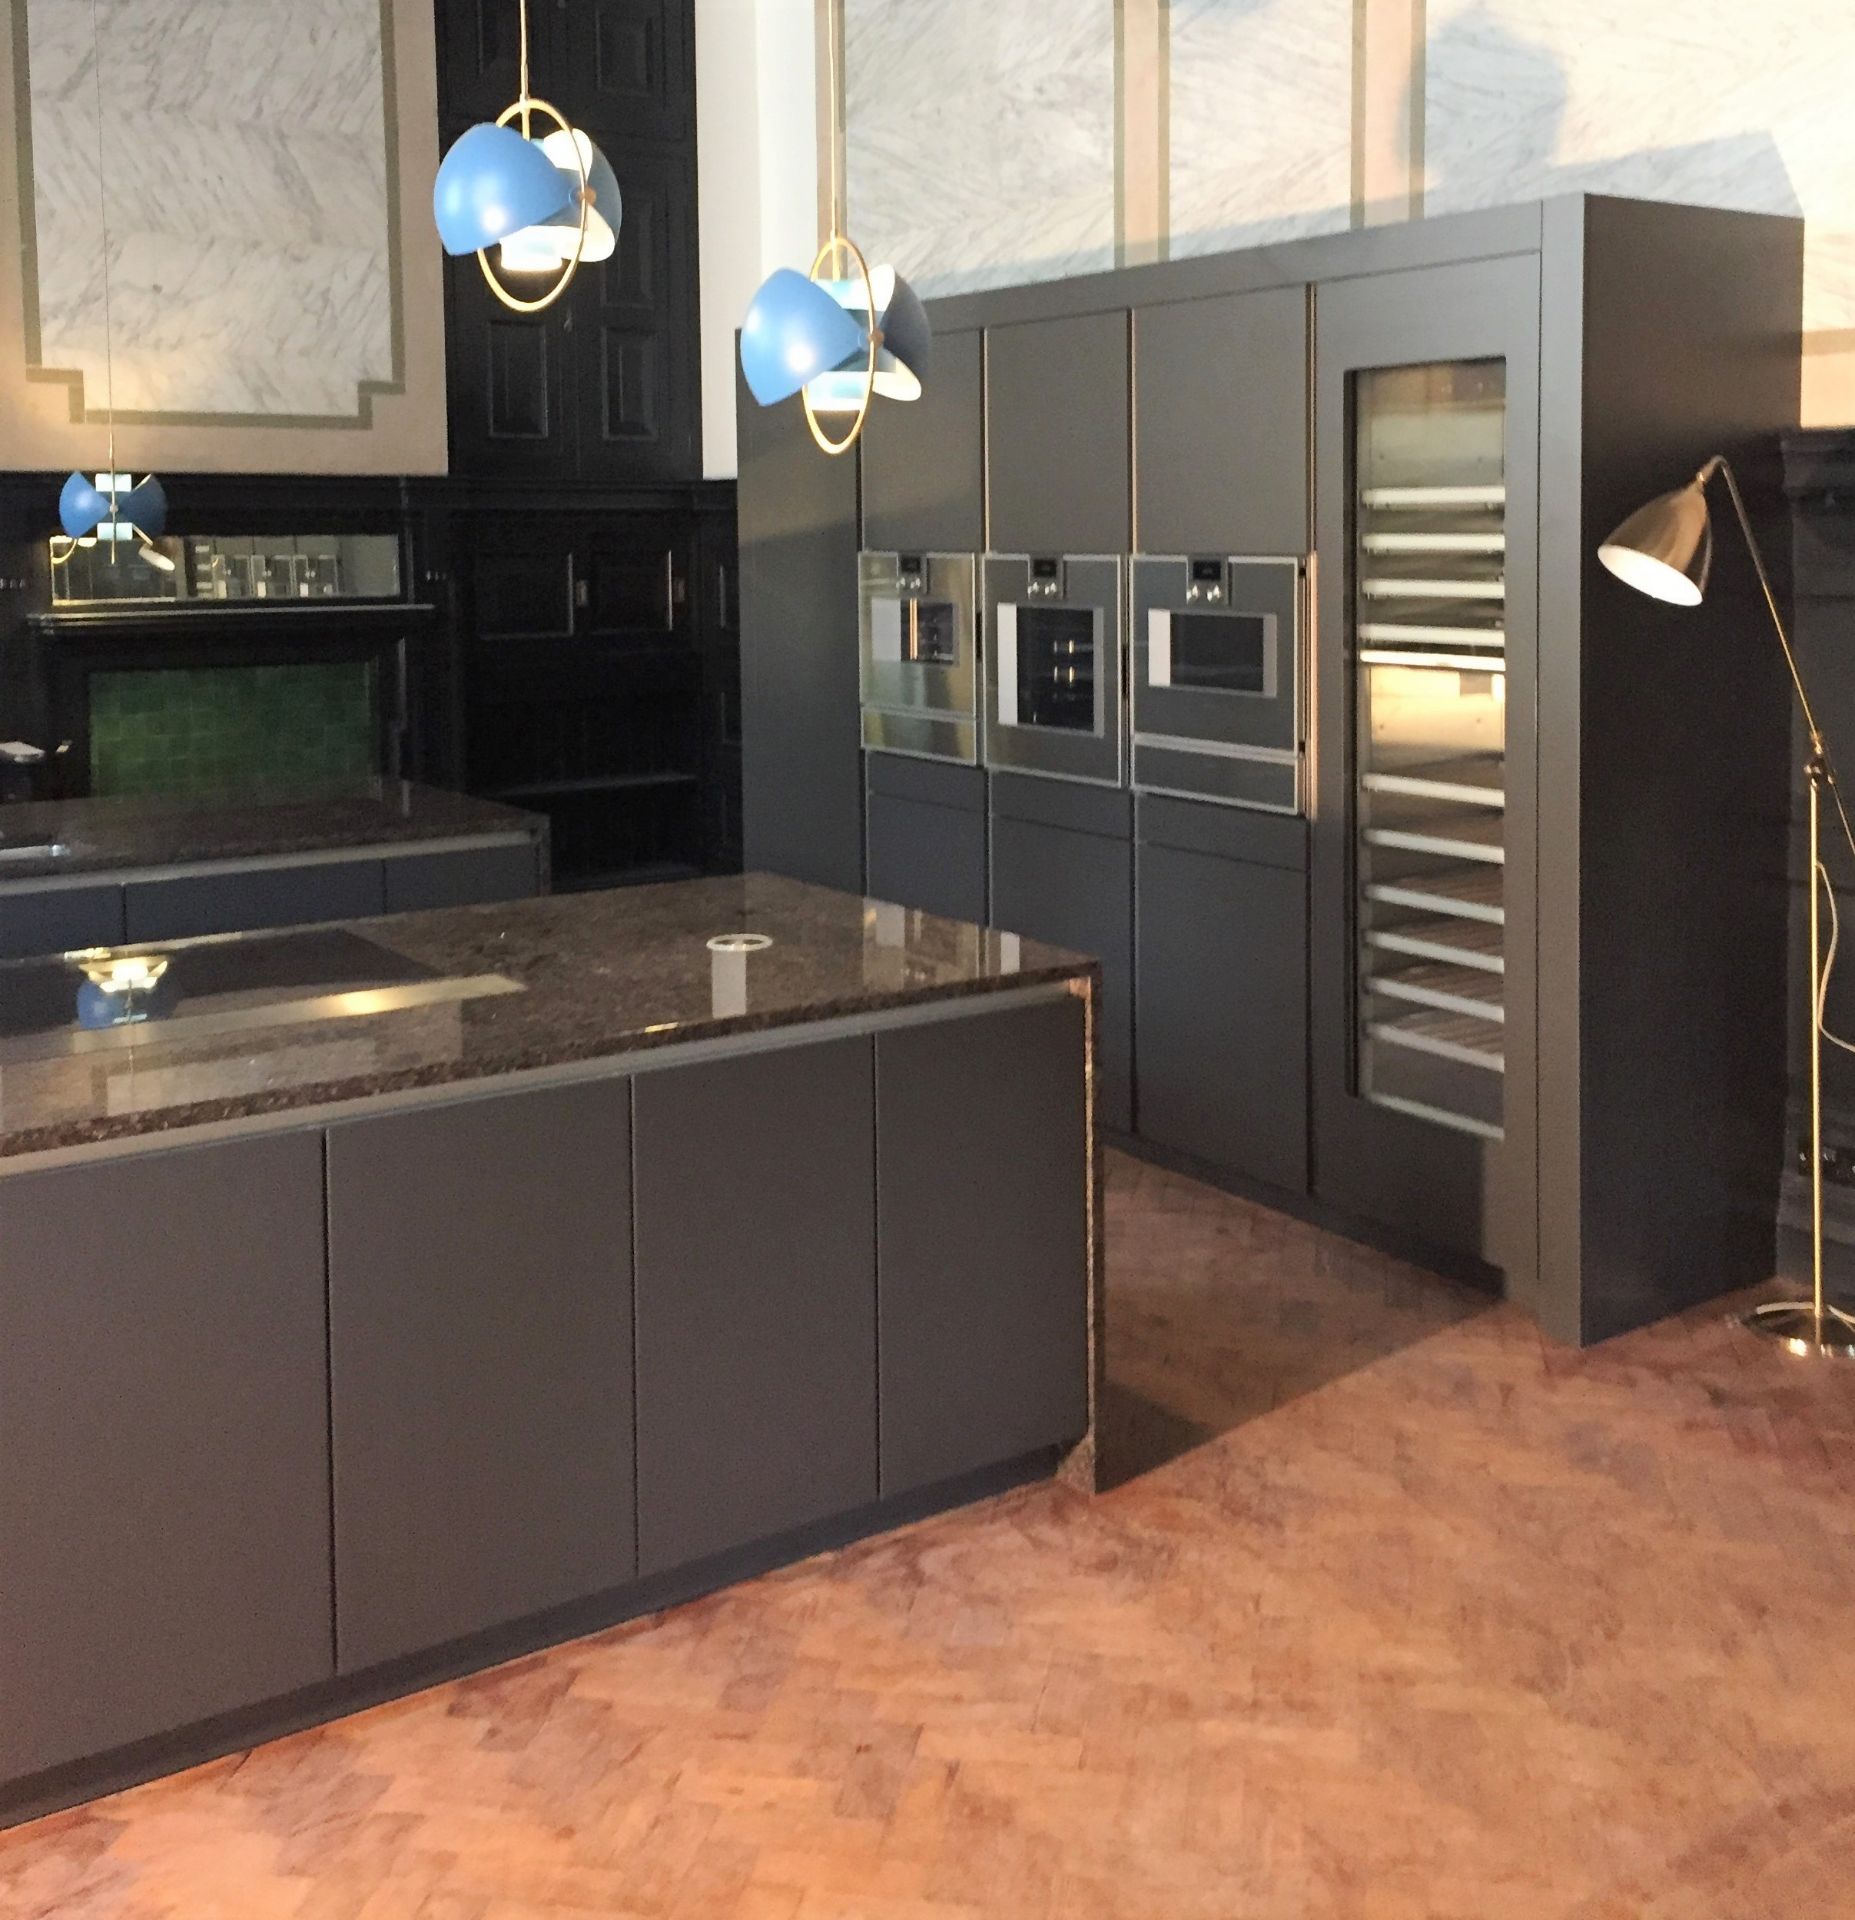 1 x SieMatic Fitted Kitchen in Basalt Grey Matt With Handleless Doors - Features Gaggenau - Image 5 of 10